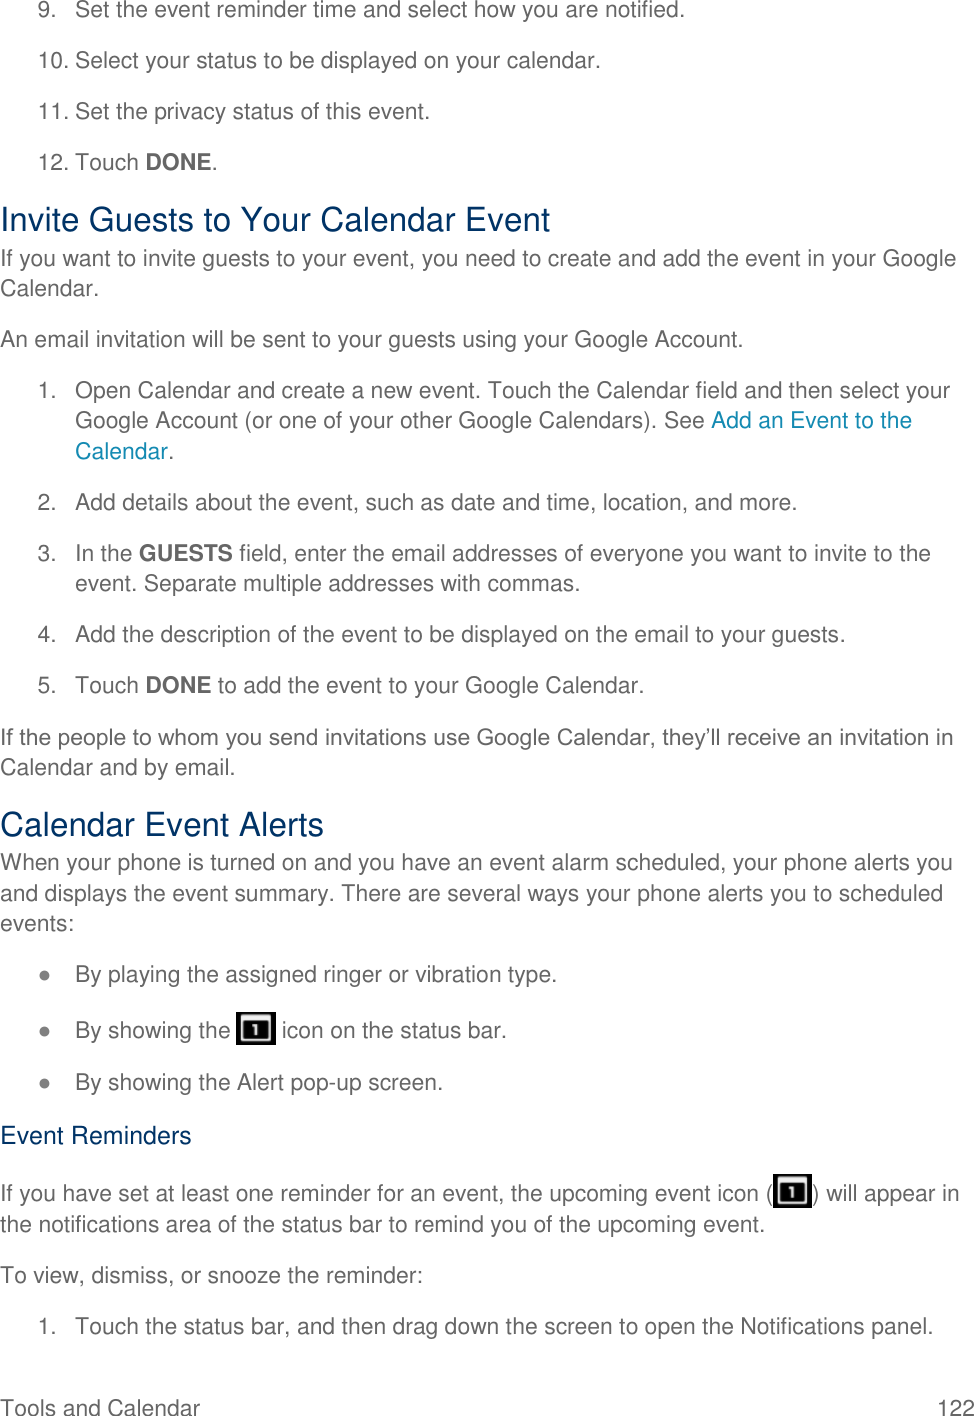 Tools and Calendar  122 9.  Set the event reminder time and select how you are notified. 10. Select your status to be displayed on your calendar. 11. Set the privacy status of this event. 12. Touch DONE. Invite Guests to Your Calendar Event  If you want to invite guests to your event, you need to create and add the event in your Google Calendar.  An email invitation will be sent to your guests using your Google Account. 1.  Open Calendar and create a new event. Touch the Calendar field and then select your Google Account (or one of your other Google Calendars). See Add an Event to the Calendar. 2.  Add details about the event, such as date and time, location, and more. 3.  In the GUESTS field, enter the email addresses of everyone you want to invite to the event. Separate multiple addresses with commas. 4.  Add the description of the event to be displayed on the email to your guests. 5.  Touch DONE to add the event to your Google Calendar. If the people to whom you send invitations use Google Calendar, they’ll receive an invitation in Calendar and by email. Calendar Event Alerts When your phone is turned on and you have an event alarm scheduled, your phone alerts you and displays the event summary. There are several ways your phone alerts you to scheduled events: ● By playing the assigned ringer or vibration type. ● By showing the   icon on the status bar. ● By showing the Alert pop-up screen. Event Reminders If you have set at least one reminder for an event, the upcoming event icon ( ) will appear in the notifications area of the status bar to remind you of the upcoming event. To view, dismiss, or snooze the reminder: 1.  Touch the status bar, and then drag down the screen to open the Notifications panel. 